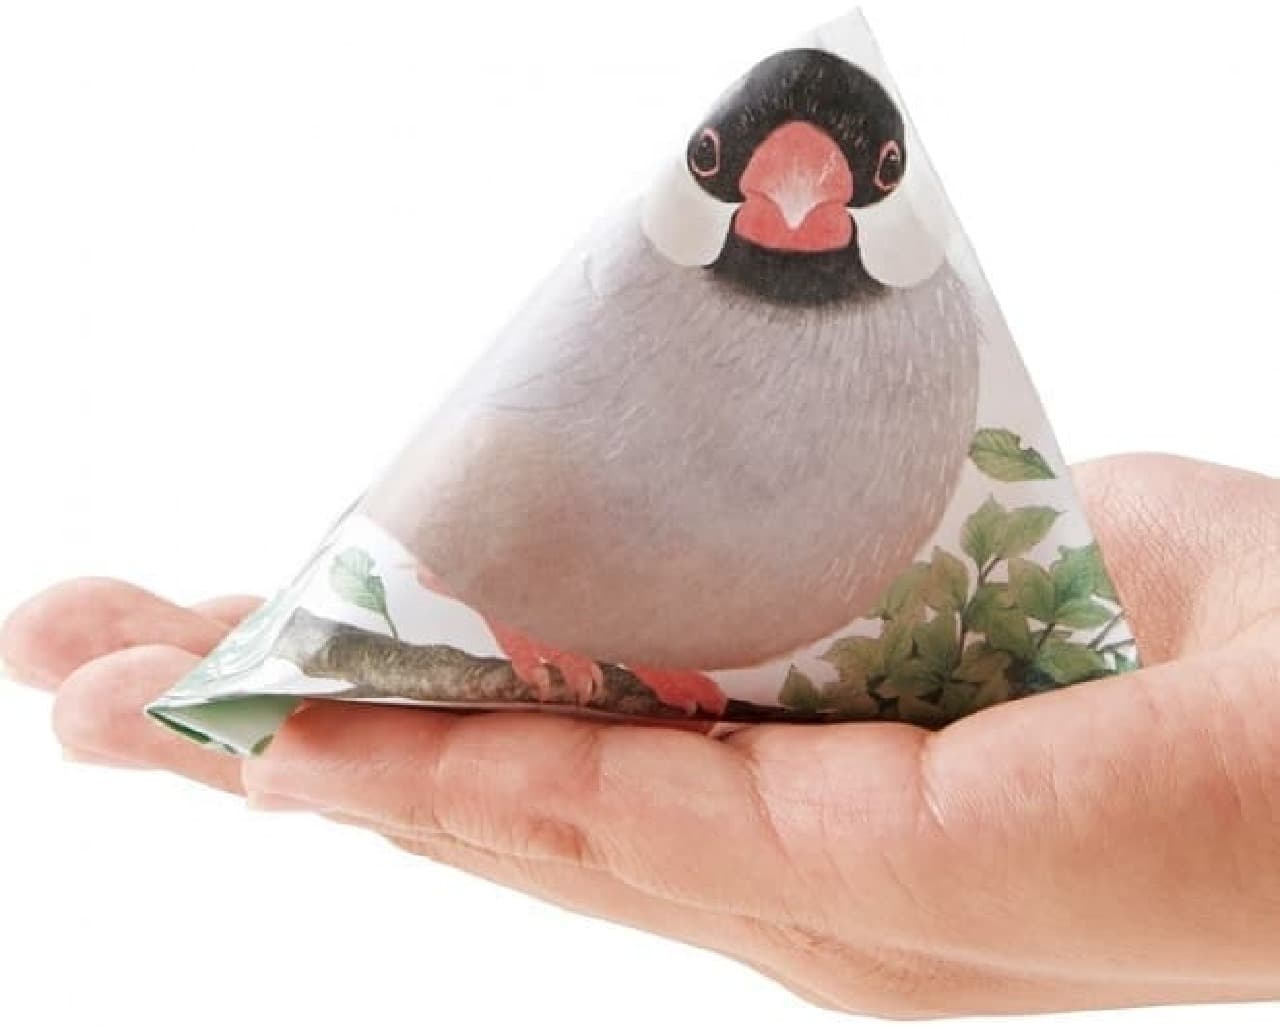 Started selling from "Hand-riding Java Sparrow Tetra Pochibukuro" and "YOU + MORE!"